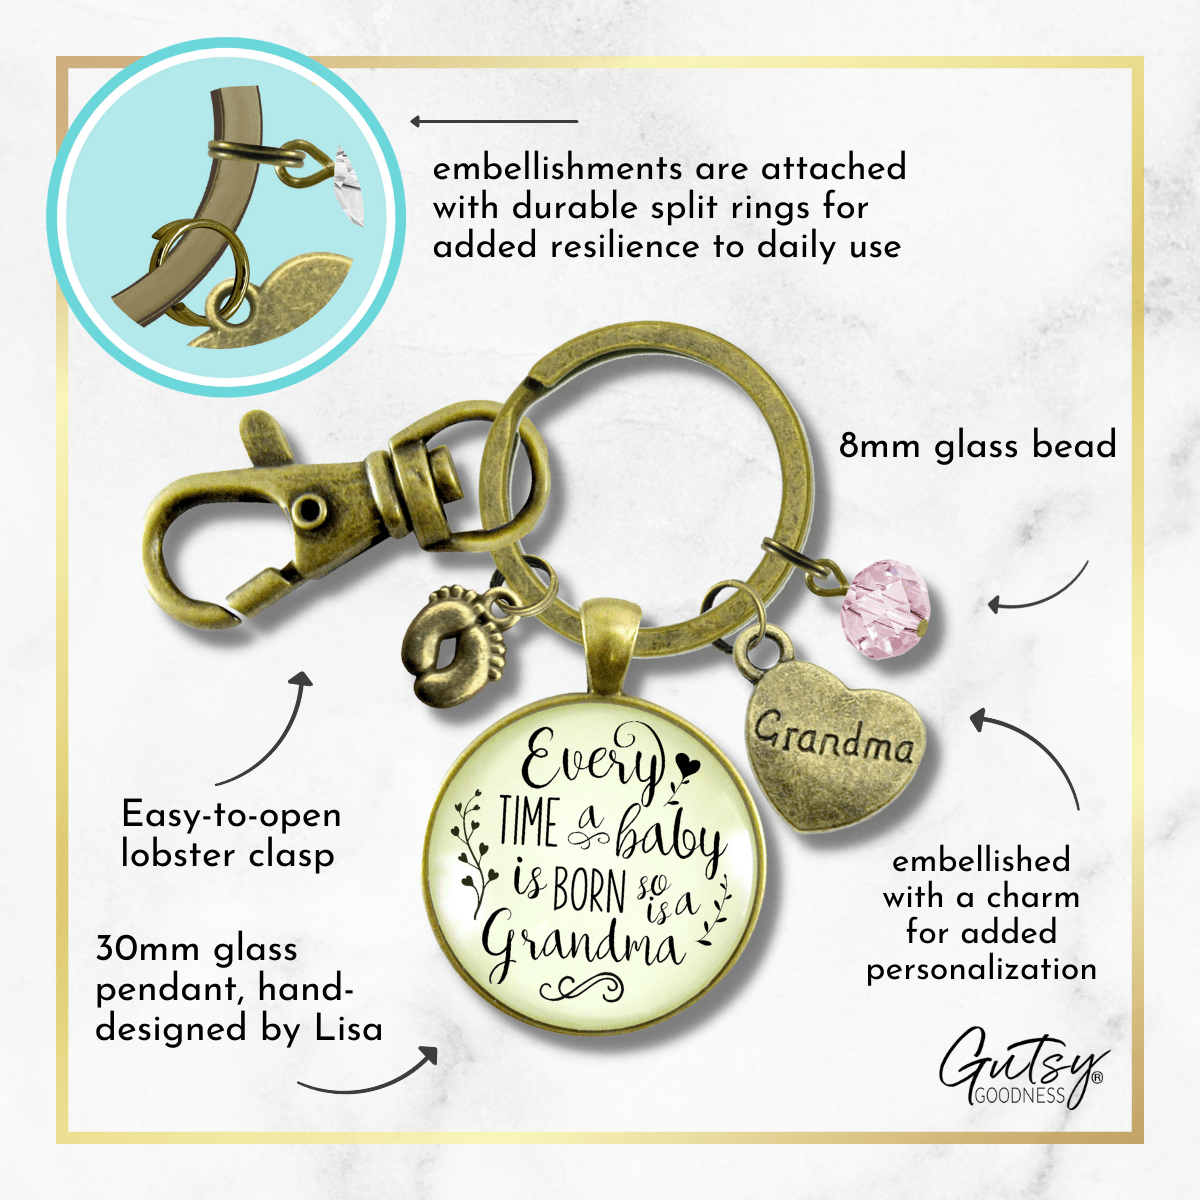 Baby Gender Reveal Keychain Every Time Born So Is Grandma Pregnancy Girl Announcement Gift Pink - Gutsy Goodness Handmade Jewelry;Baby Gender Reveal Keychain Every Time Born So Is Grandma Pregnancy Girl Announcement Gift Pink - Gutsy Goodness Handmade Jewelry Gifts